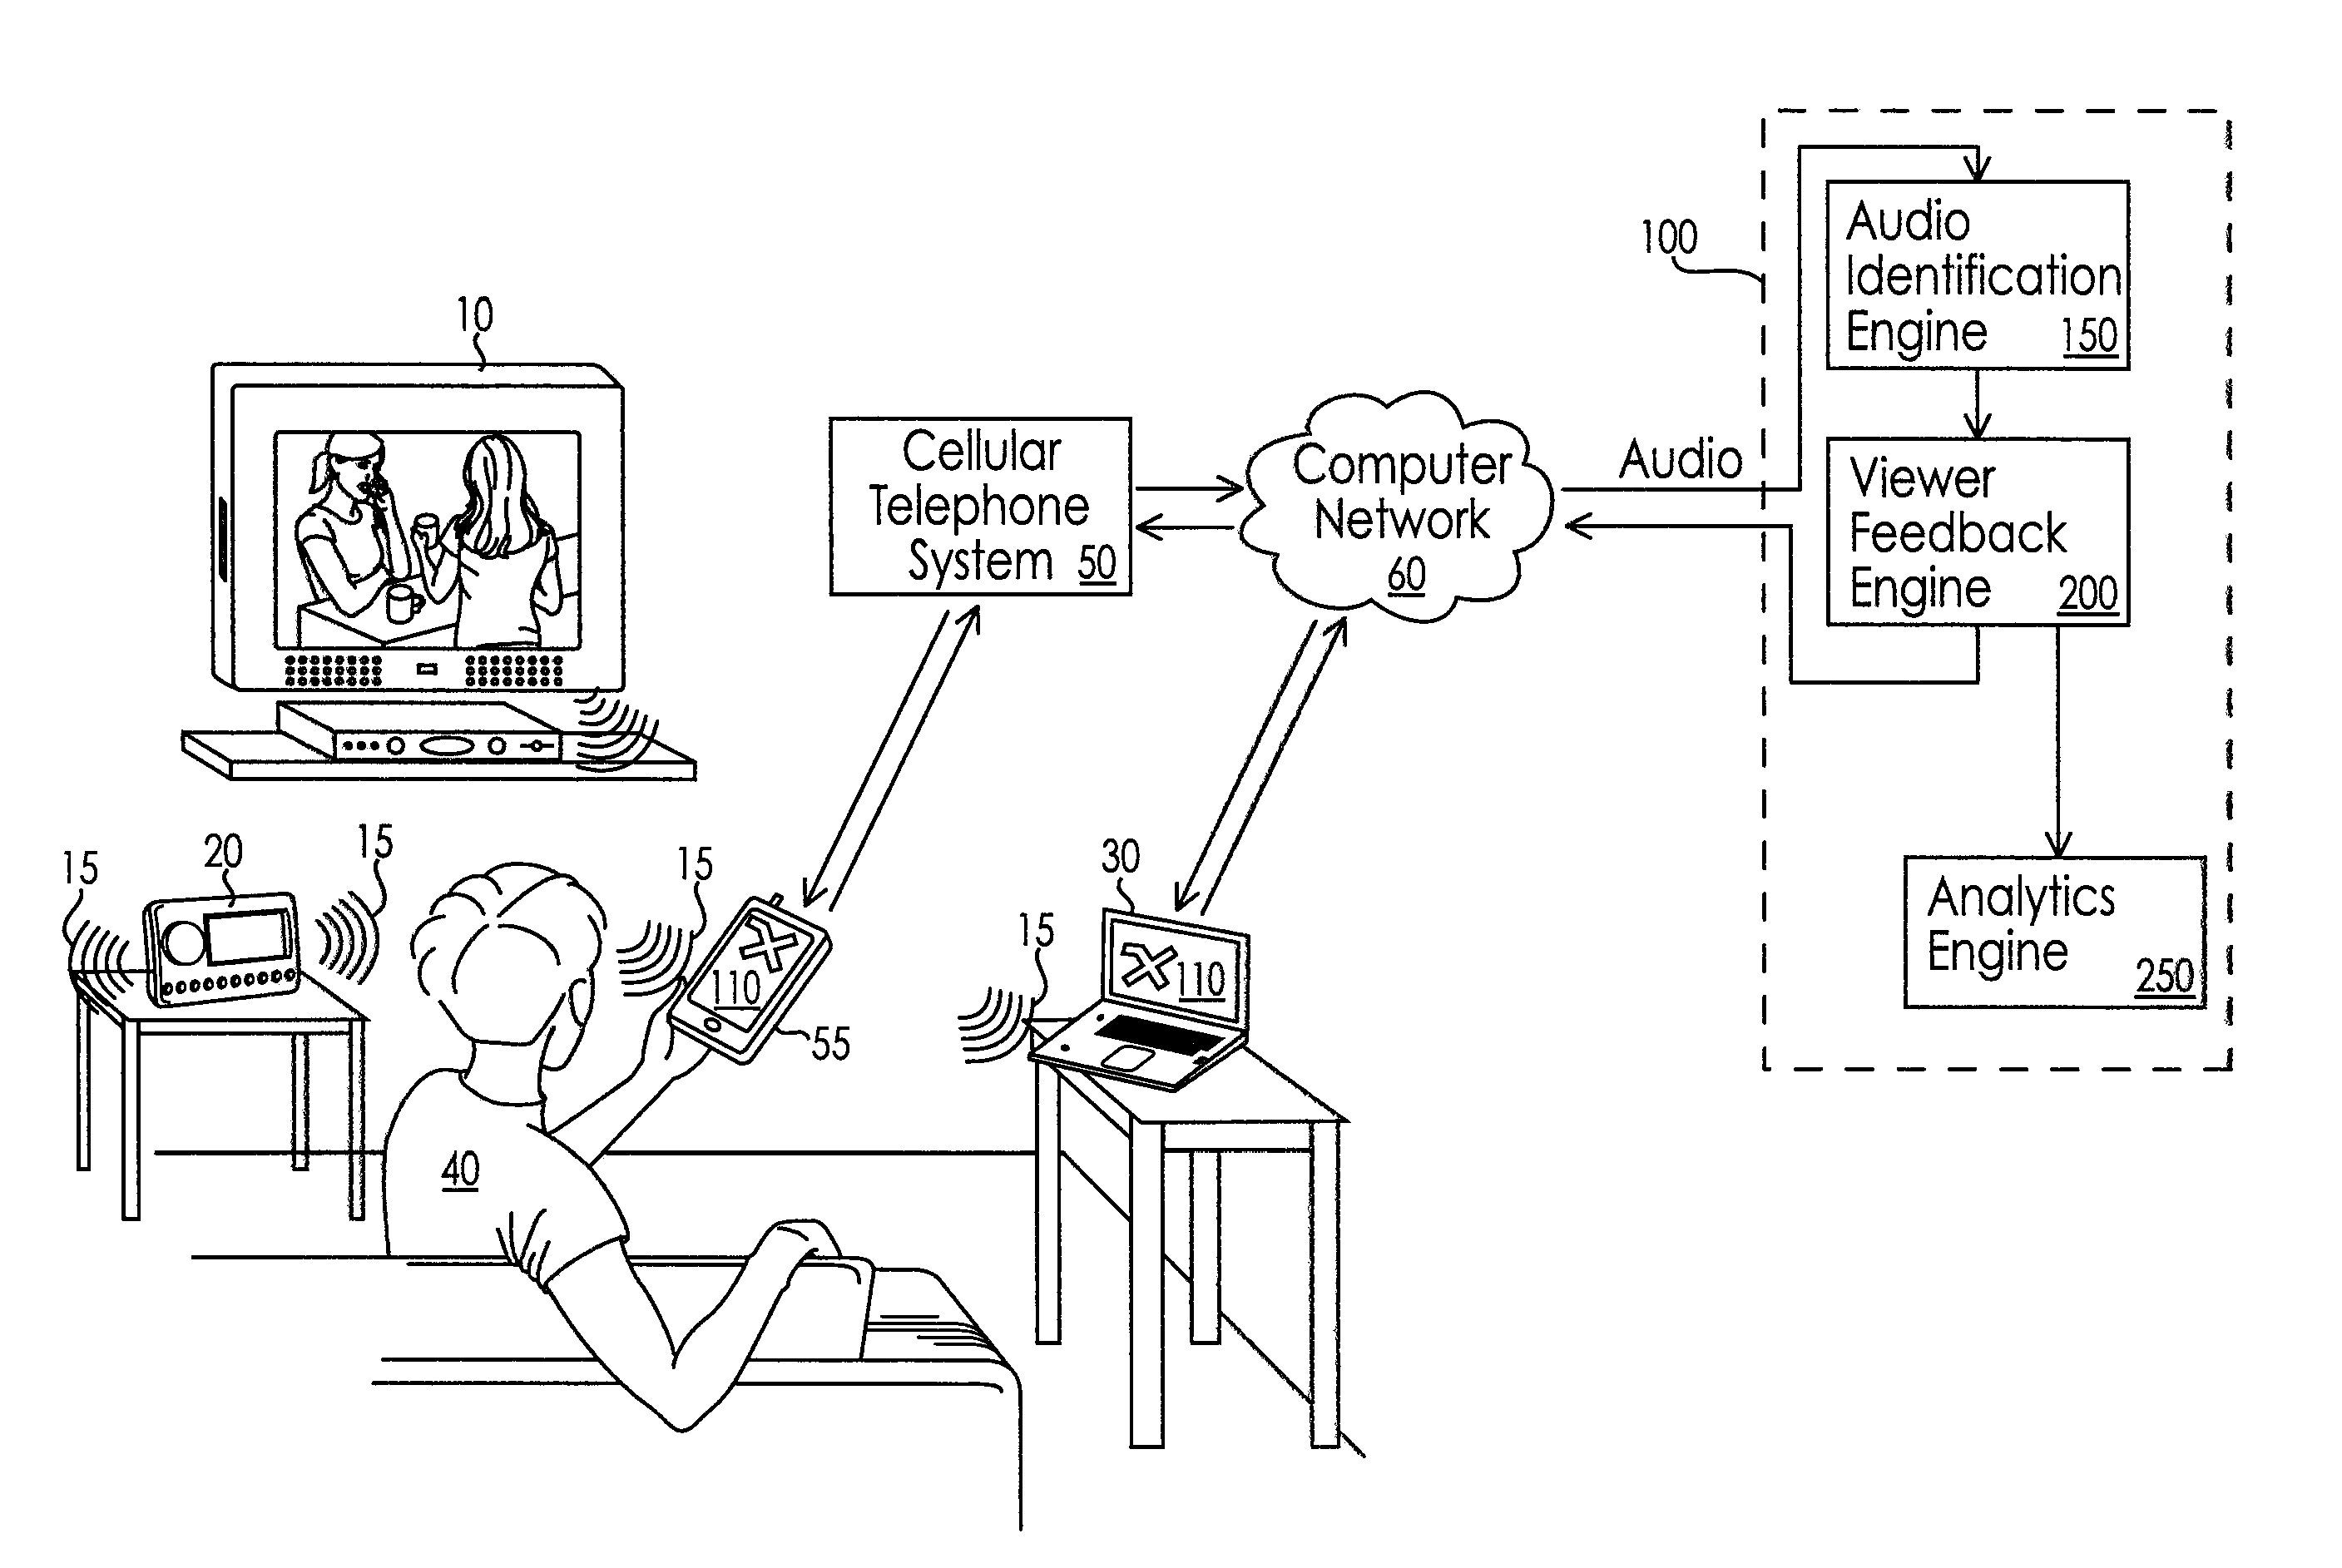 System and Method for Tracking and Rewarding Media and Entertainment Usage Including Substantially Real Time Rewards